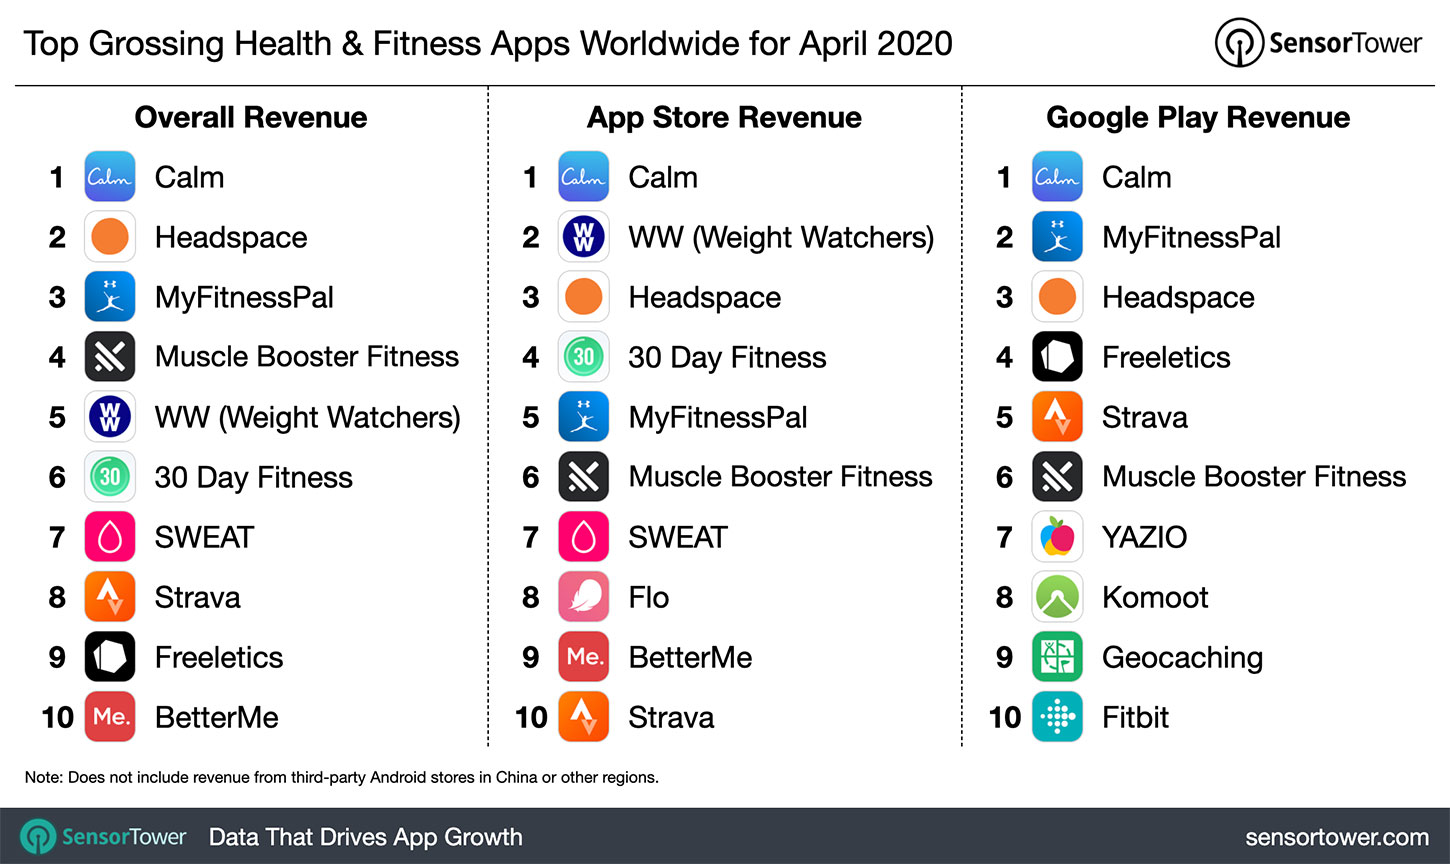 top-grossing-health-and-fitness-apps-worldwide-april-2020.jpg